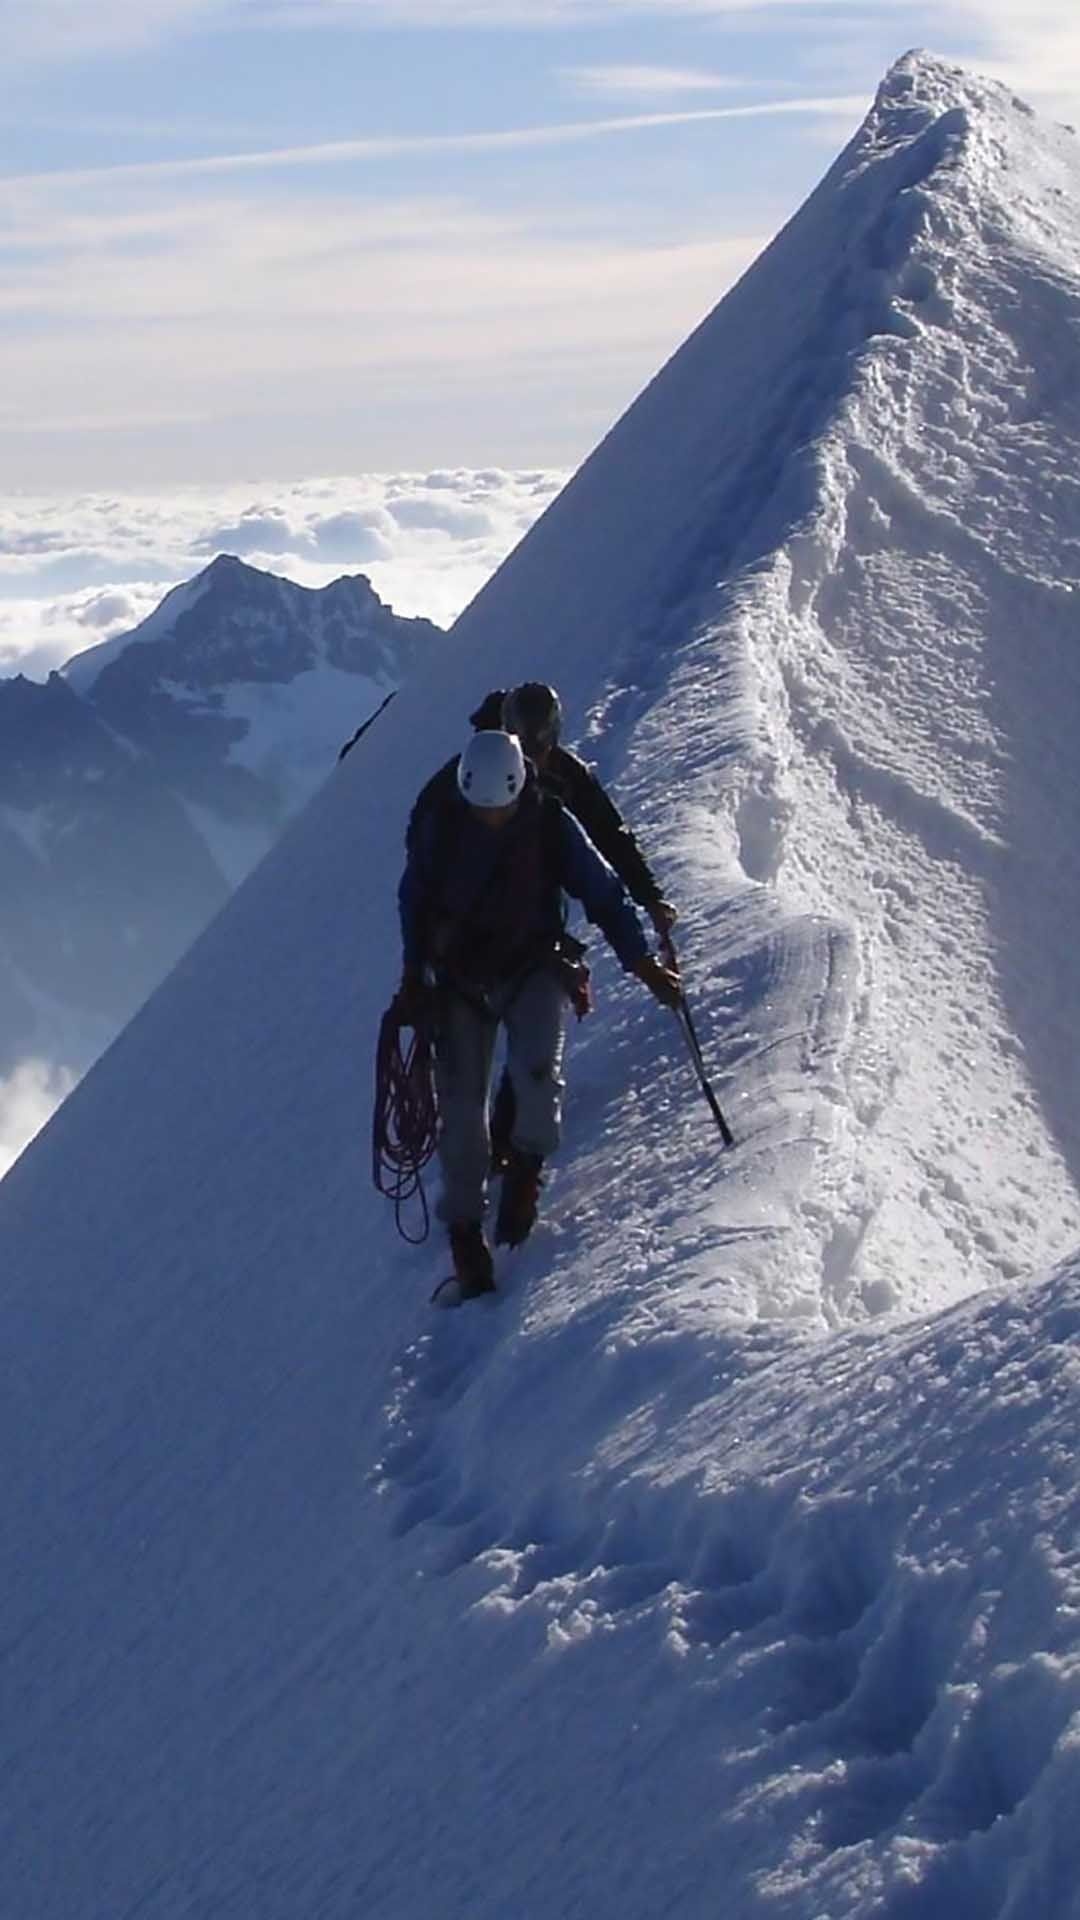 Climbing, Adventure wallpapers, Nature's challenge, Mountaineering passion, 1080x1920 Full HD Handy